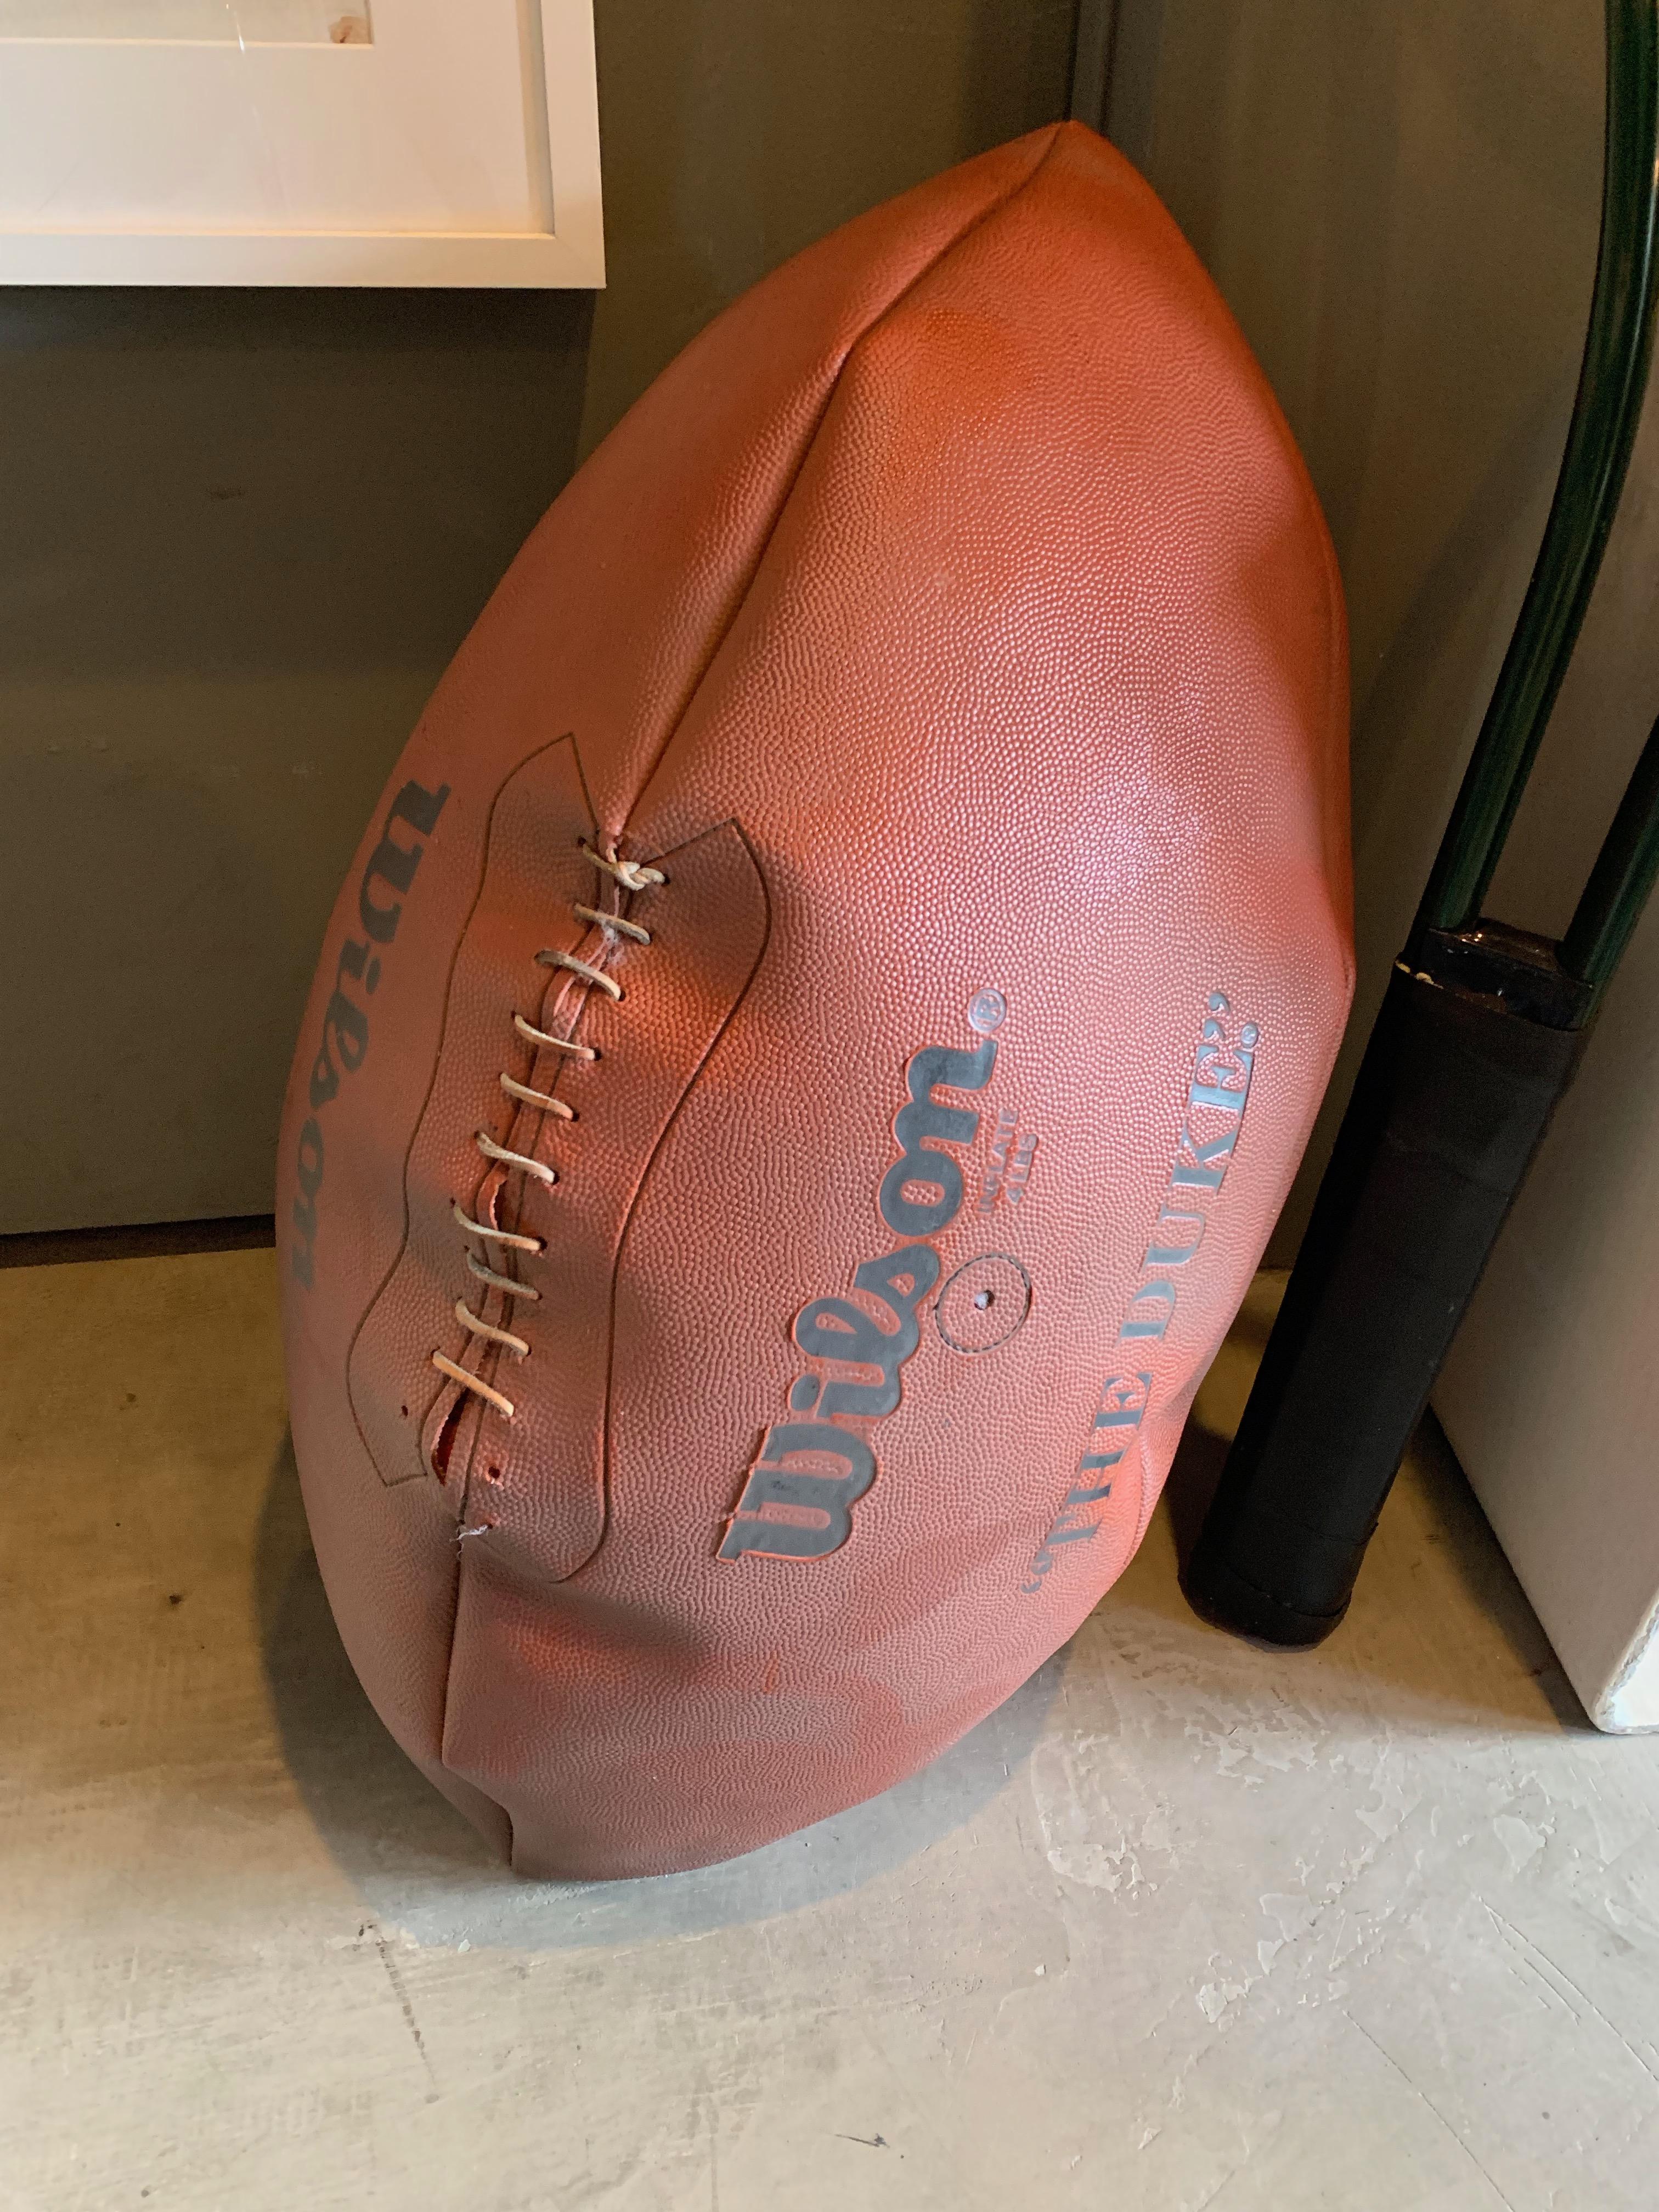 leather football for sale